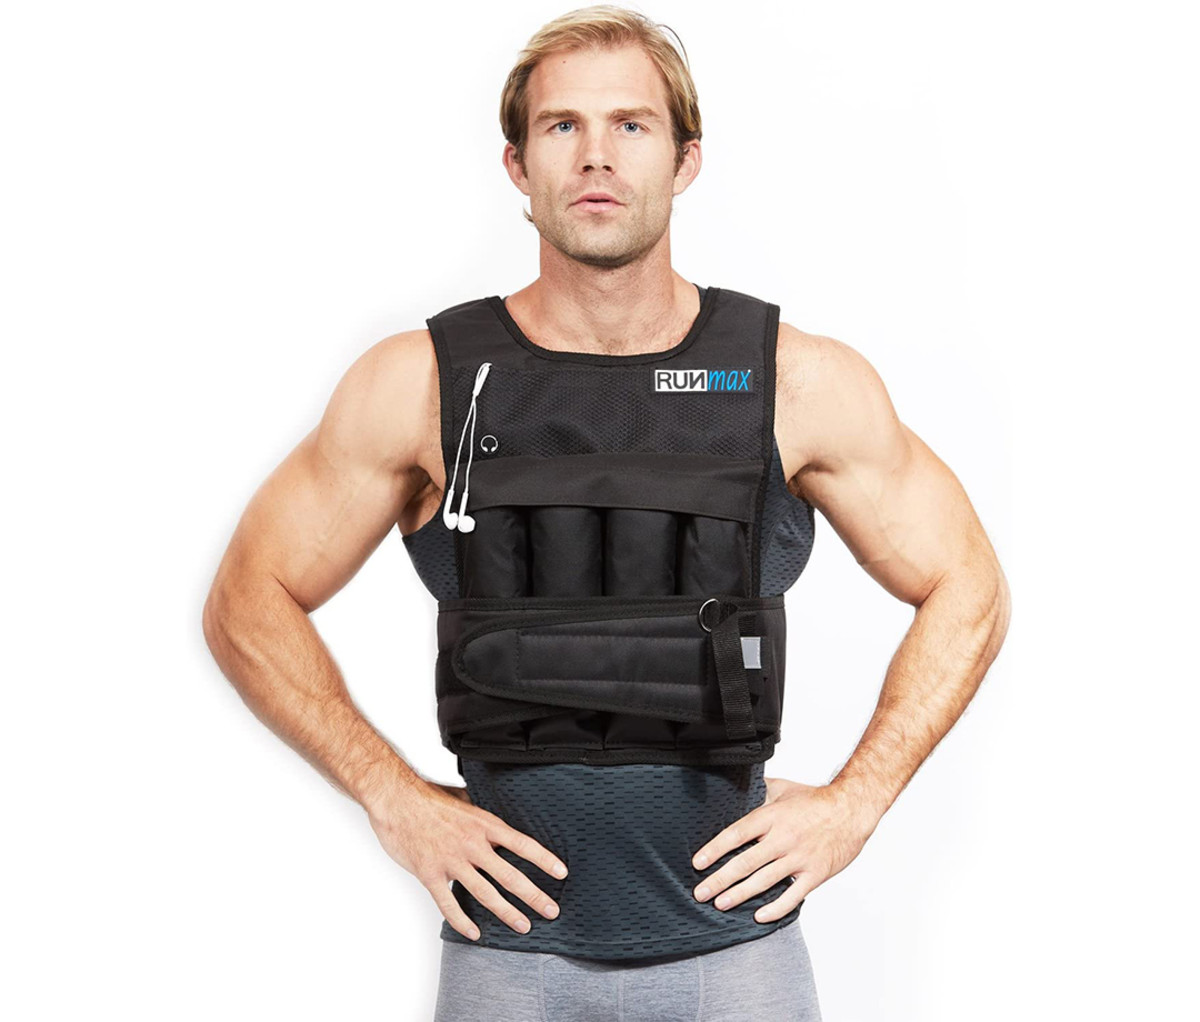 Go The Extra Mile With This RUNMax Adjustable Weighted Vest - Men's Journal